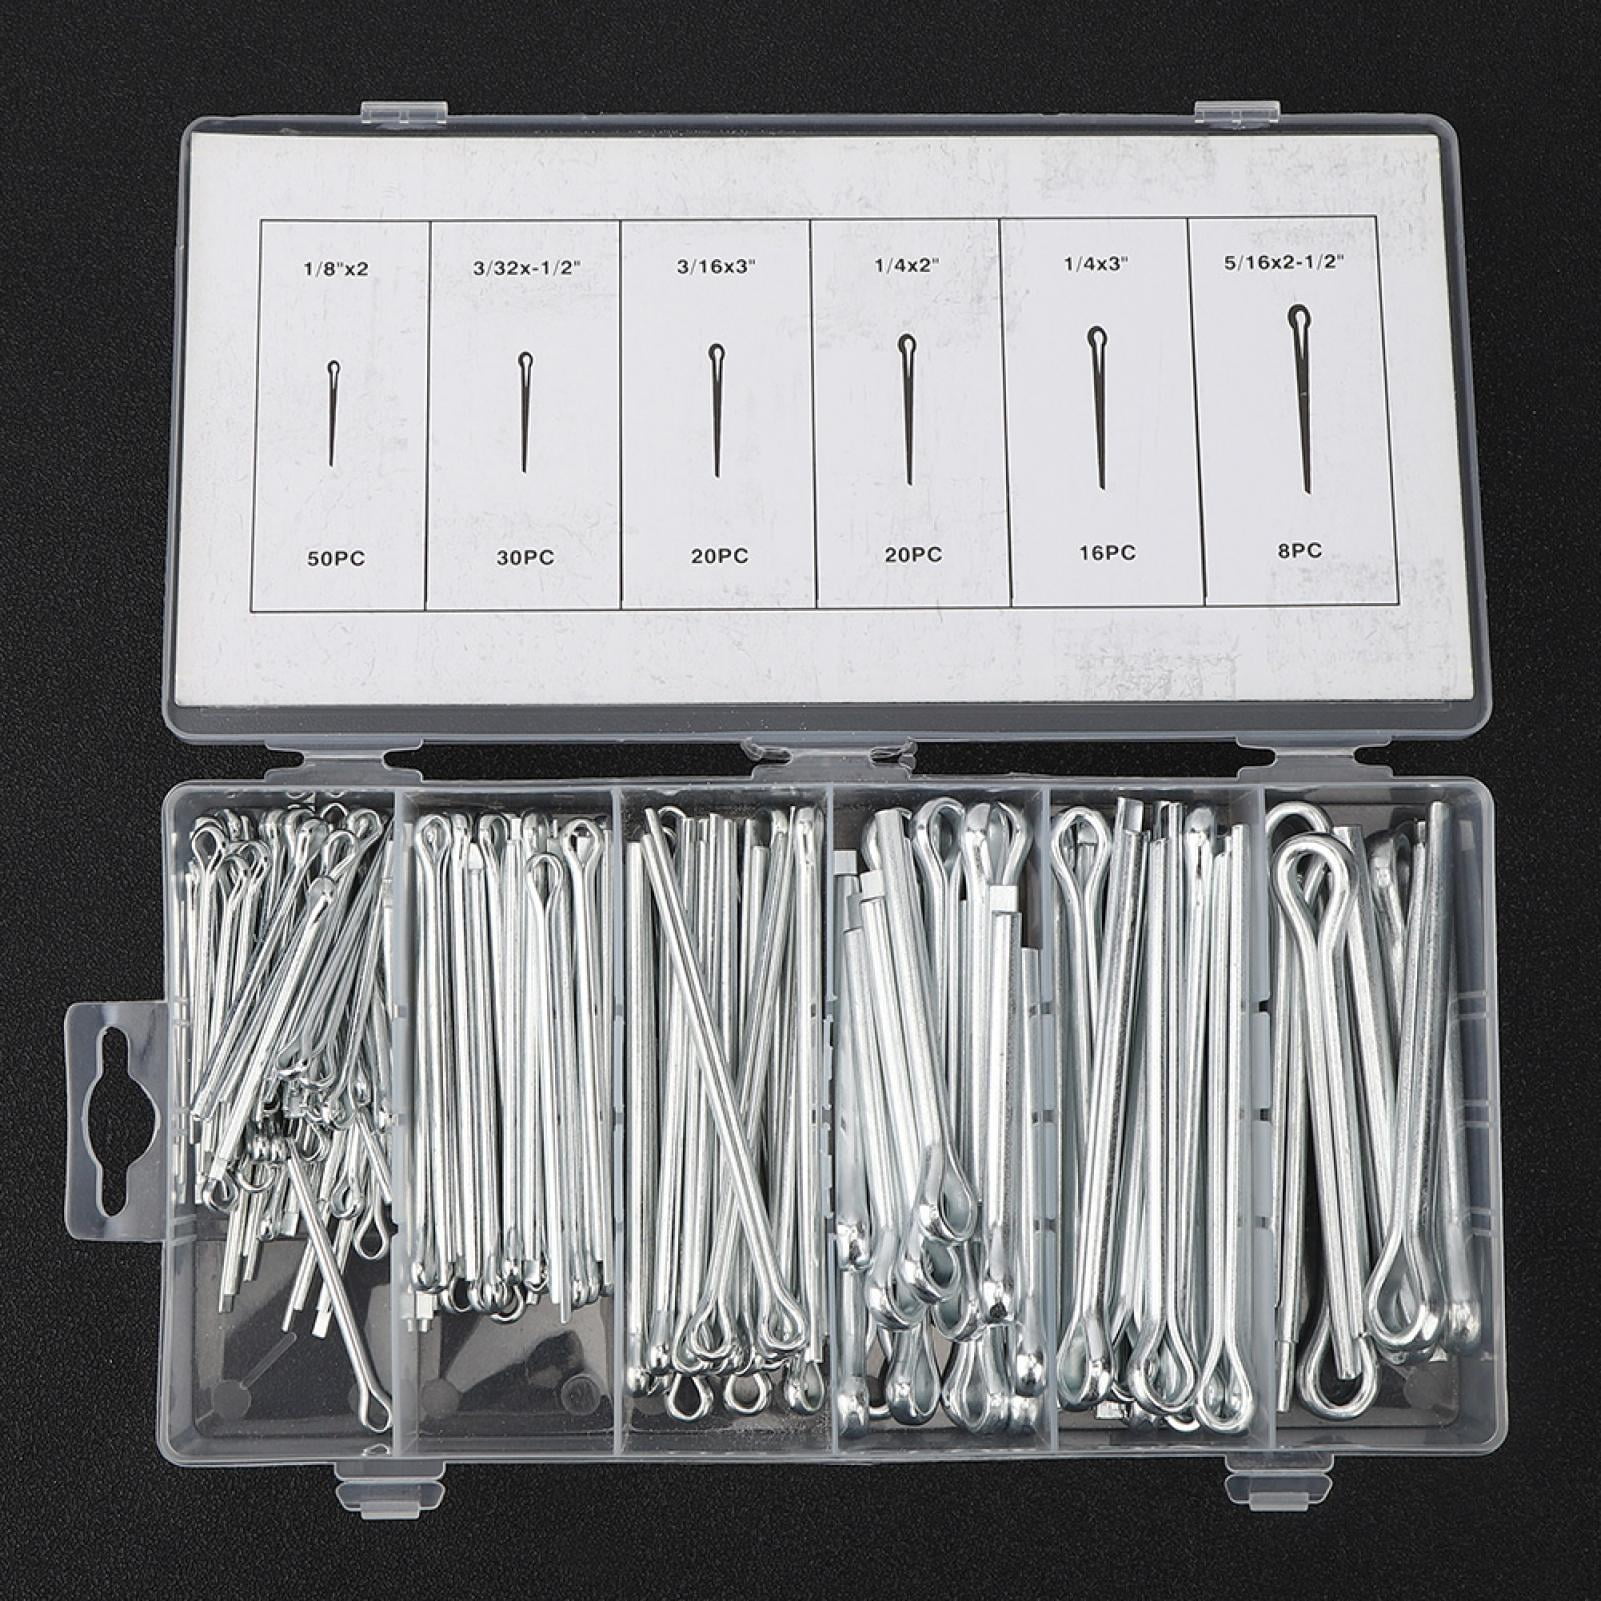 144Pcs Iron Material Strong Corrosion Resistance Convenient To Use Cotter Pin Assortment for Industrial Mechanical Mechanical Fastener Cotter Pin Set 